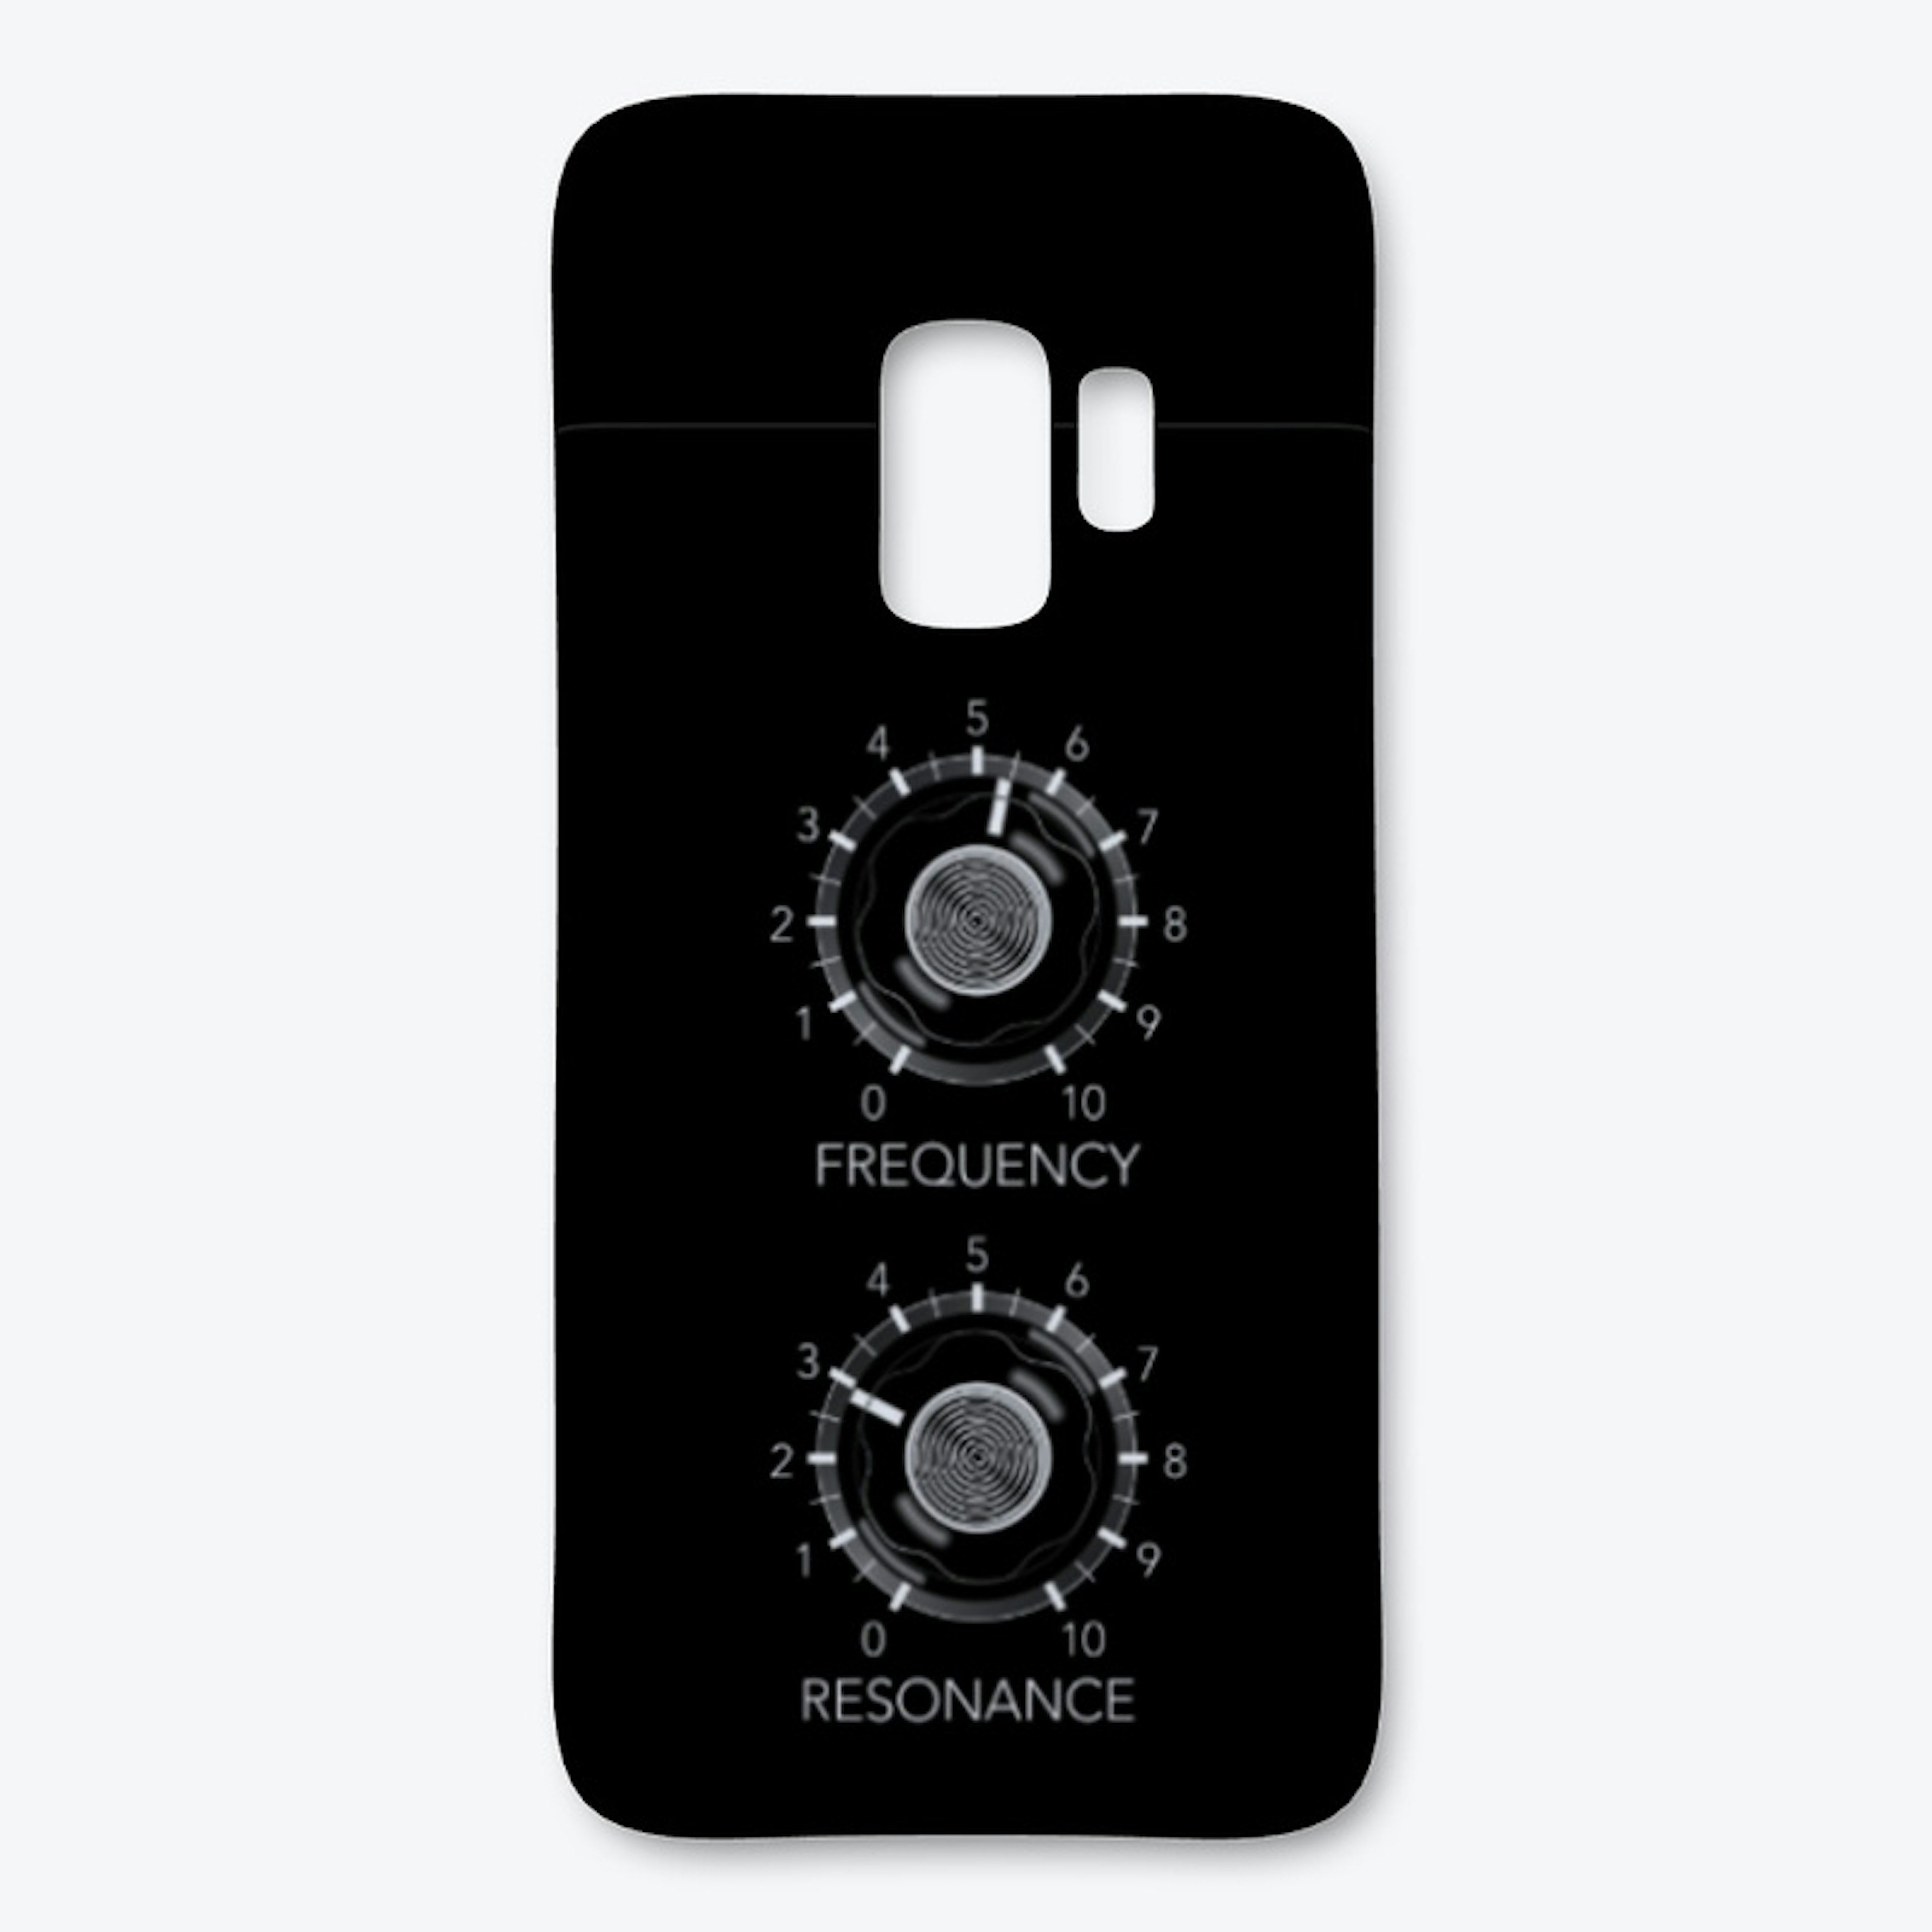 Modular Synth Thinking - Phone Cases